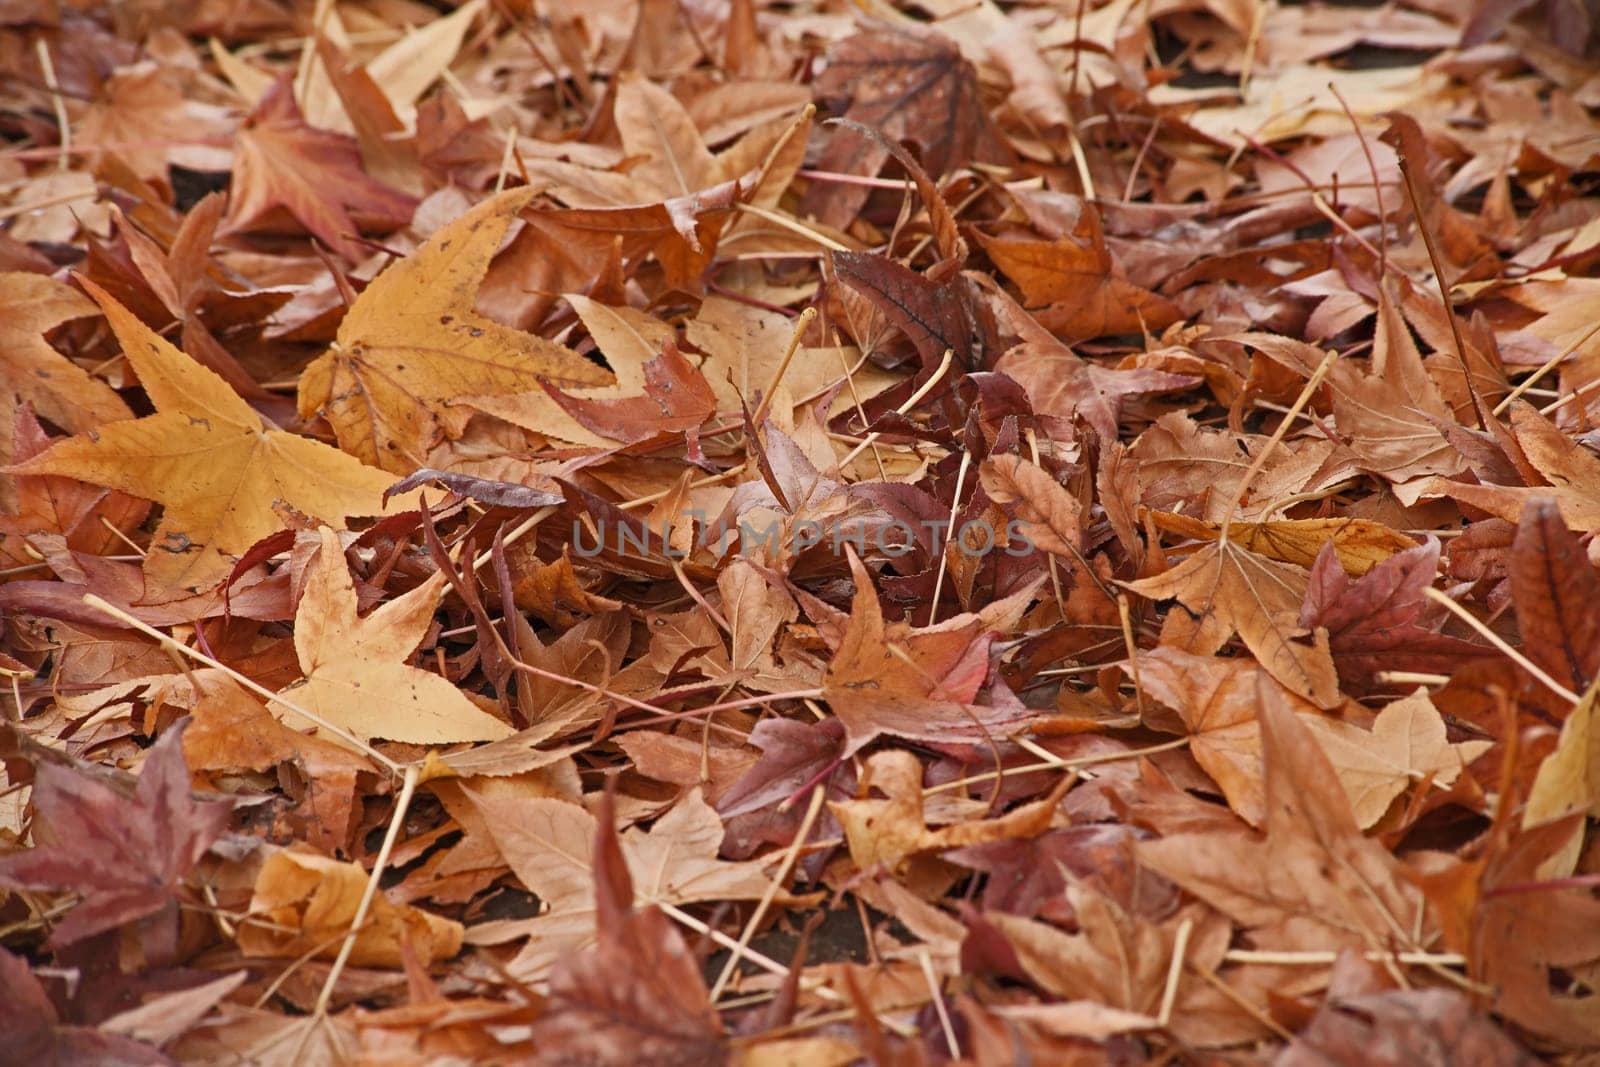 Colorful fallen autumn leaves 14525 by kobus_peche